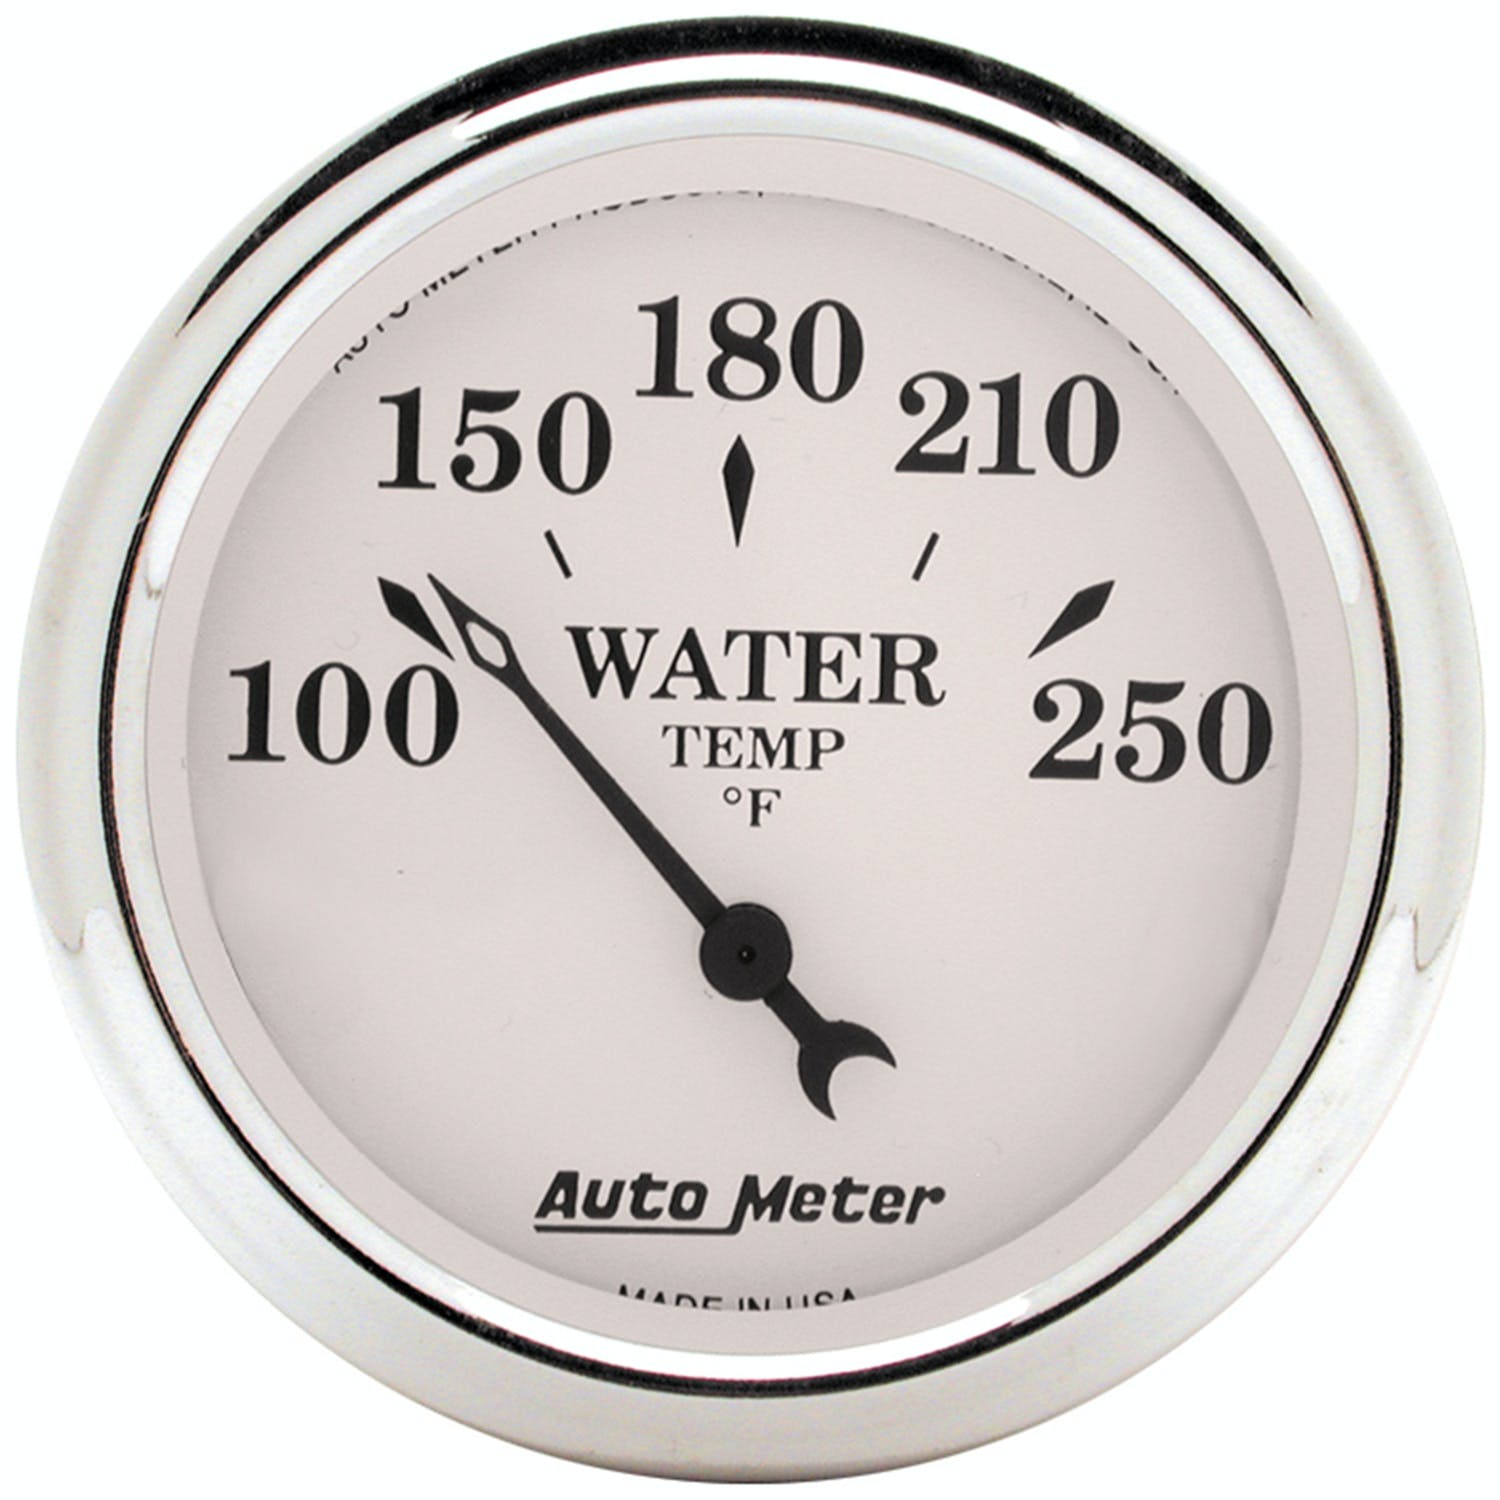 AutoMeter Products 1638 Water Temperature Gauge 100-250 F